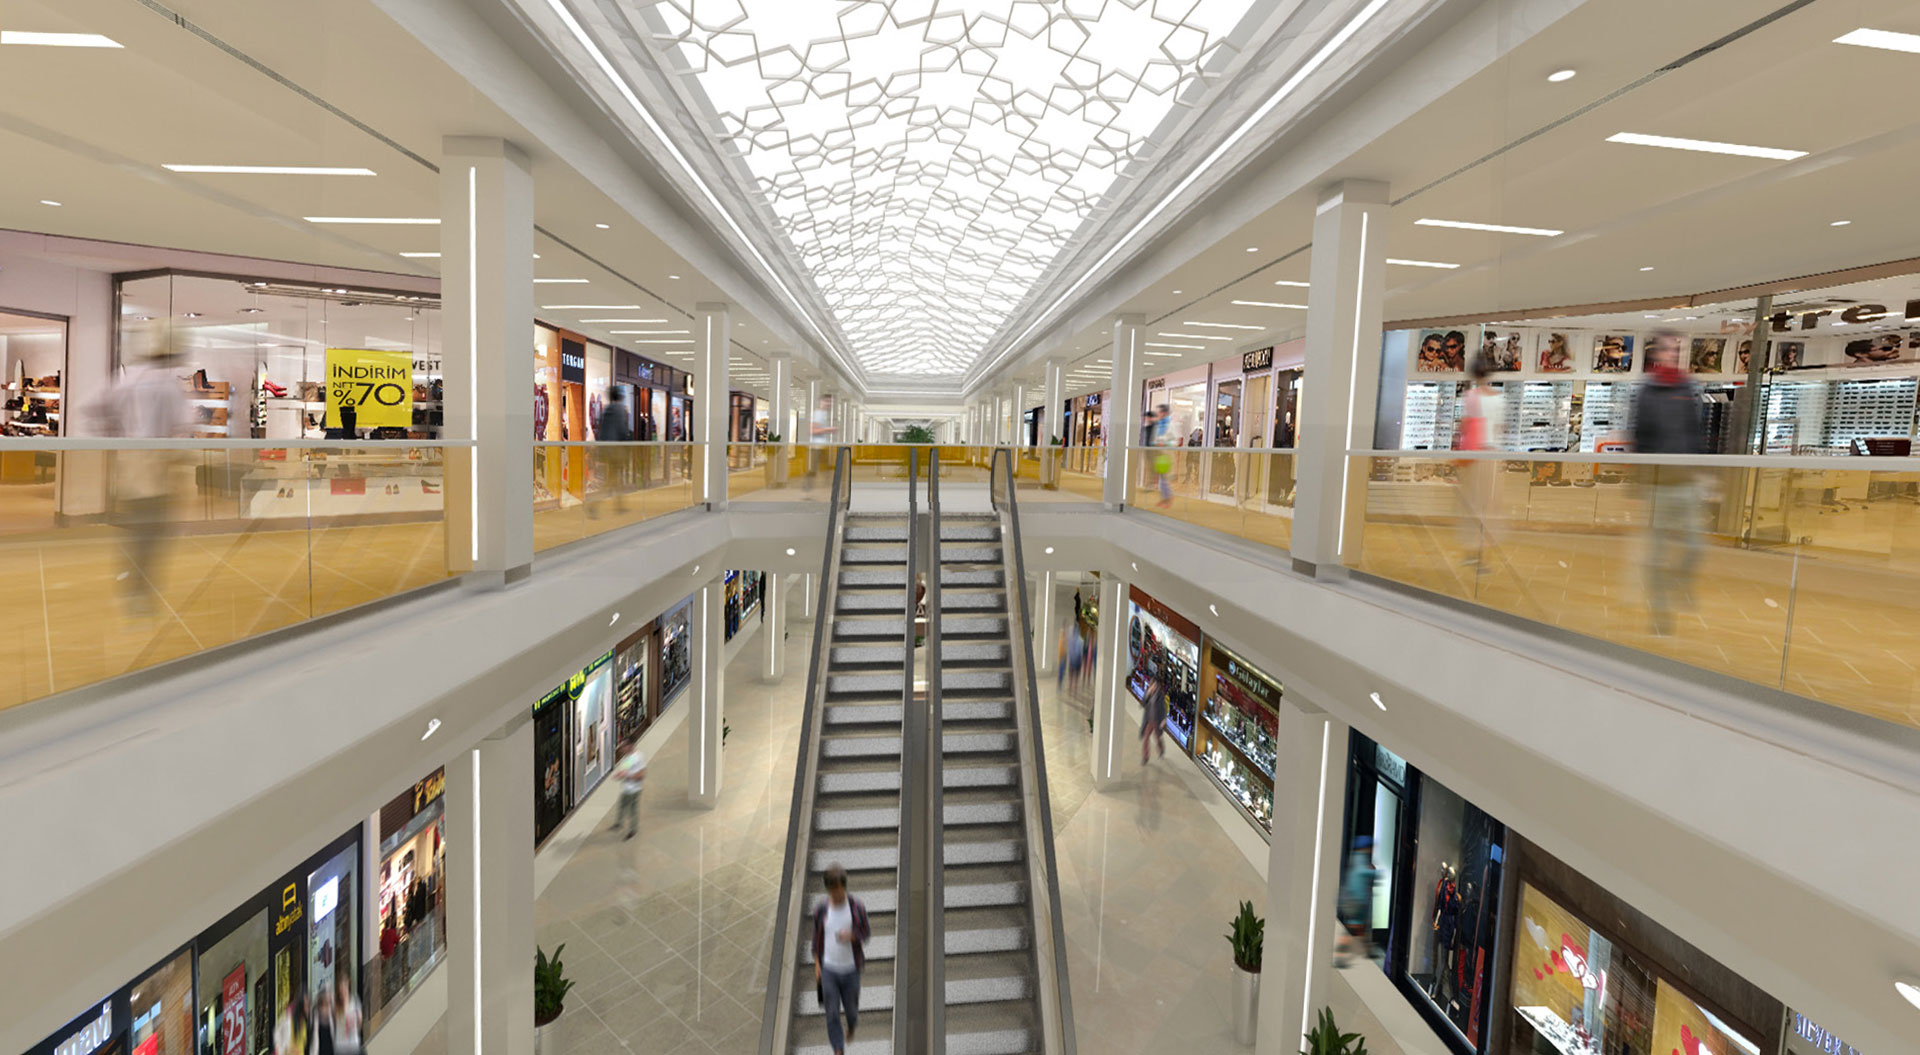 Icerenkoy shopping mall Istanbul architecture, interior design escalator circulation and geodesic glazed roof design